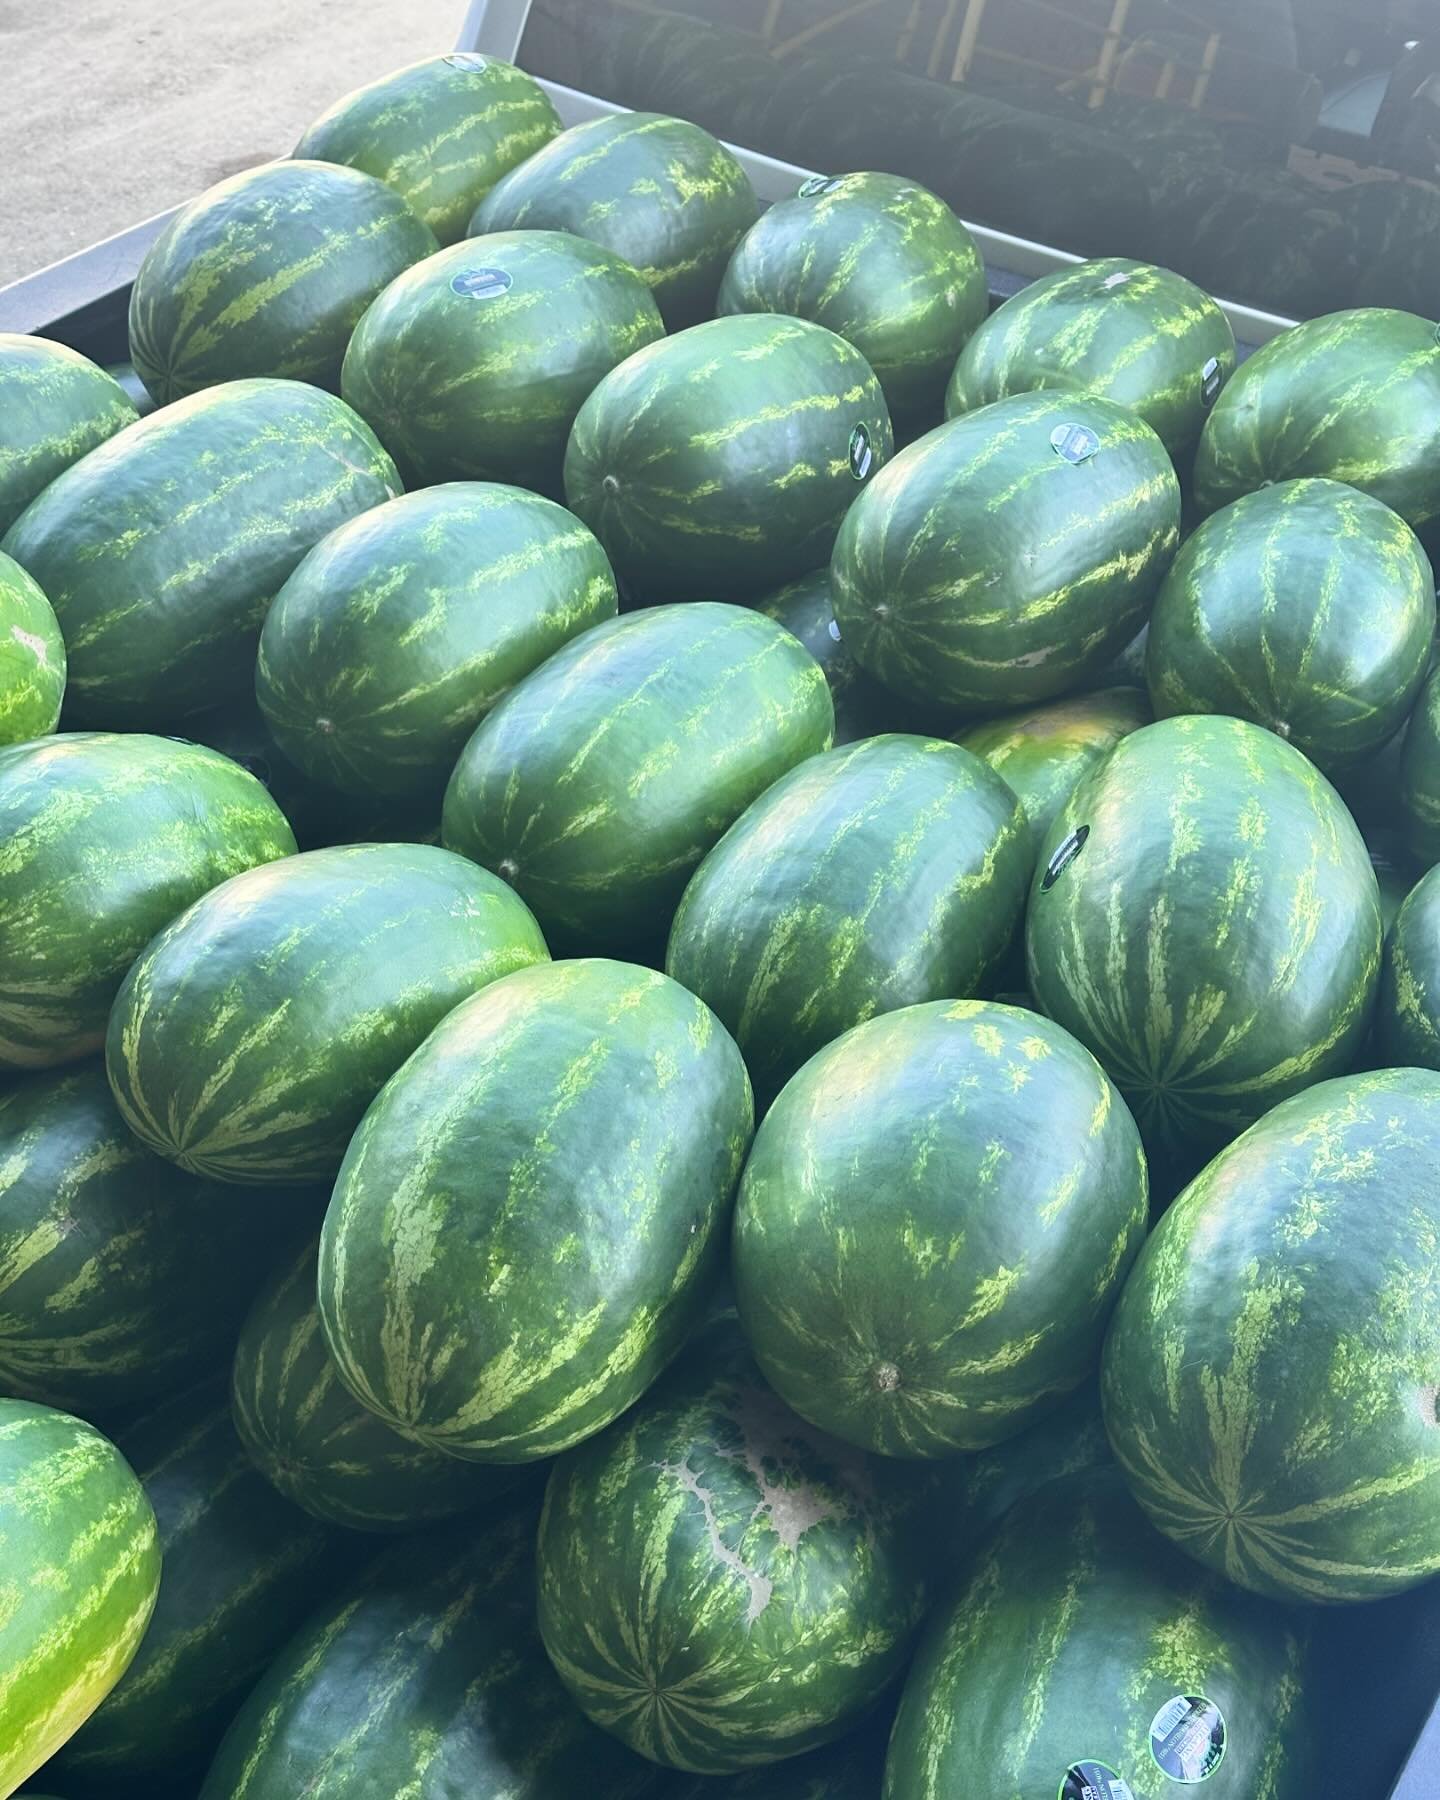 One man crusade to bring you the best produce money can buy! Owner Donovan picking up more Sweet Jumbo Seeded Red Watermelons 🍉 more volume is beginning to build so the likelihood of being sold out is lessening throughout our 11 hour business day. #